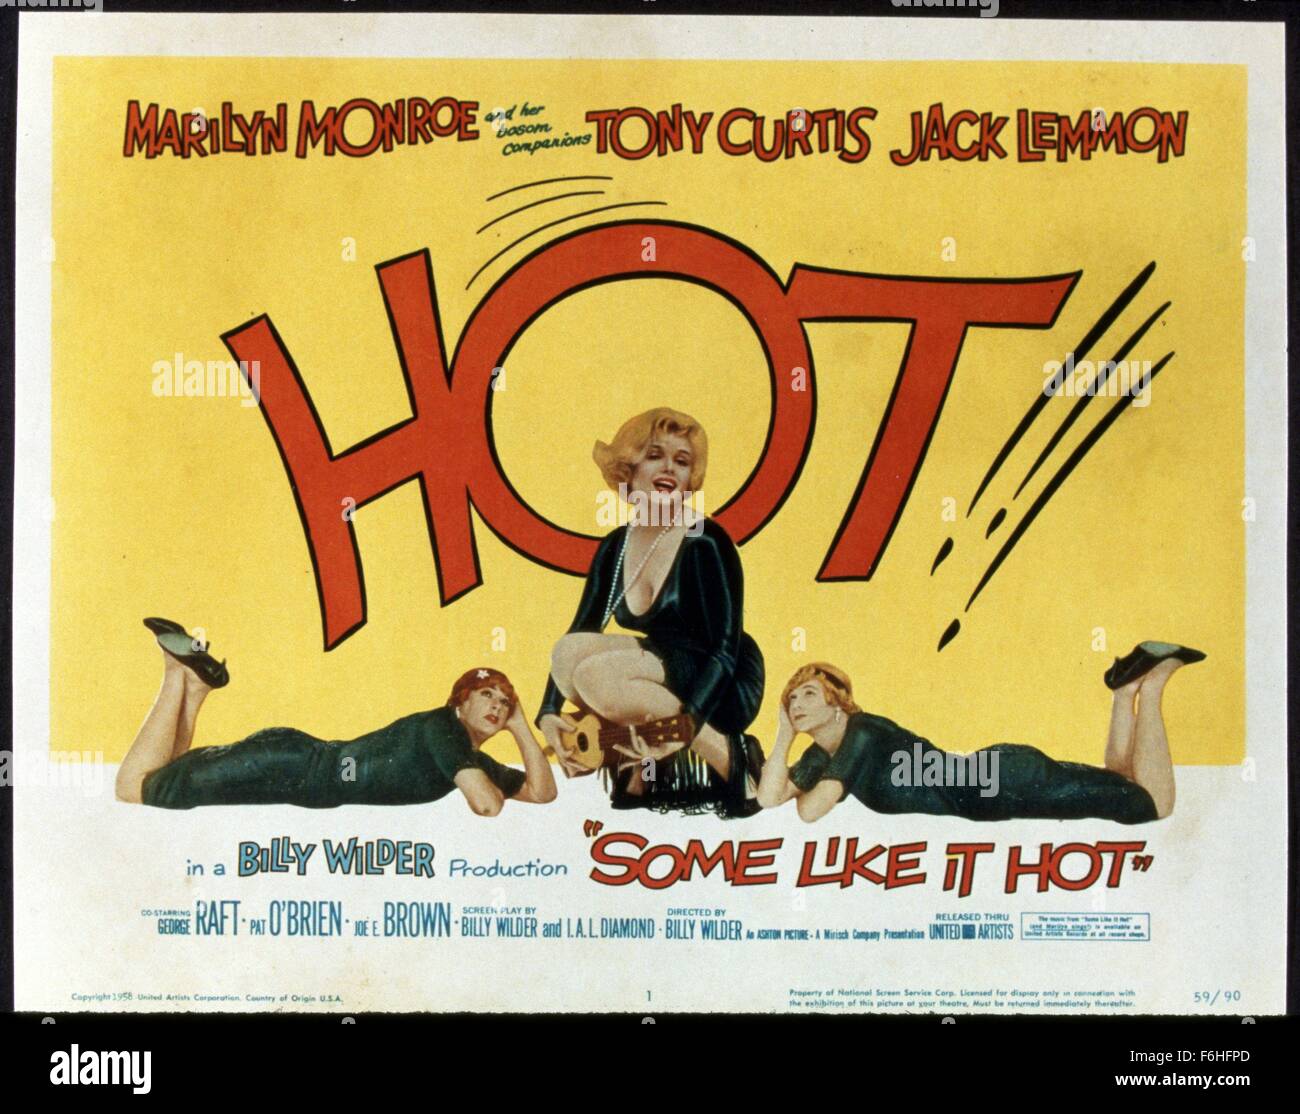 1959, Film Title: SOME LIKE IT HOT, Director: BILLY WILDER, Studio: UA, Pictured: CLOTHING, TONY CURTIS, DRAG, JACK LEMMON, MARILYN MONROE, BILLY WILDER, GIRL BAND, GENDER BENDER, DISGUISE, MASQUERADE, MIMICRY, SQUATTING. (Credit Image: SNAP) Stock Photo